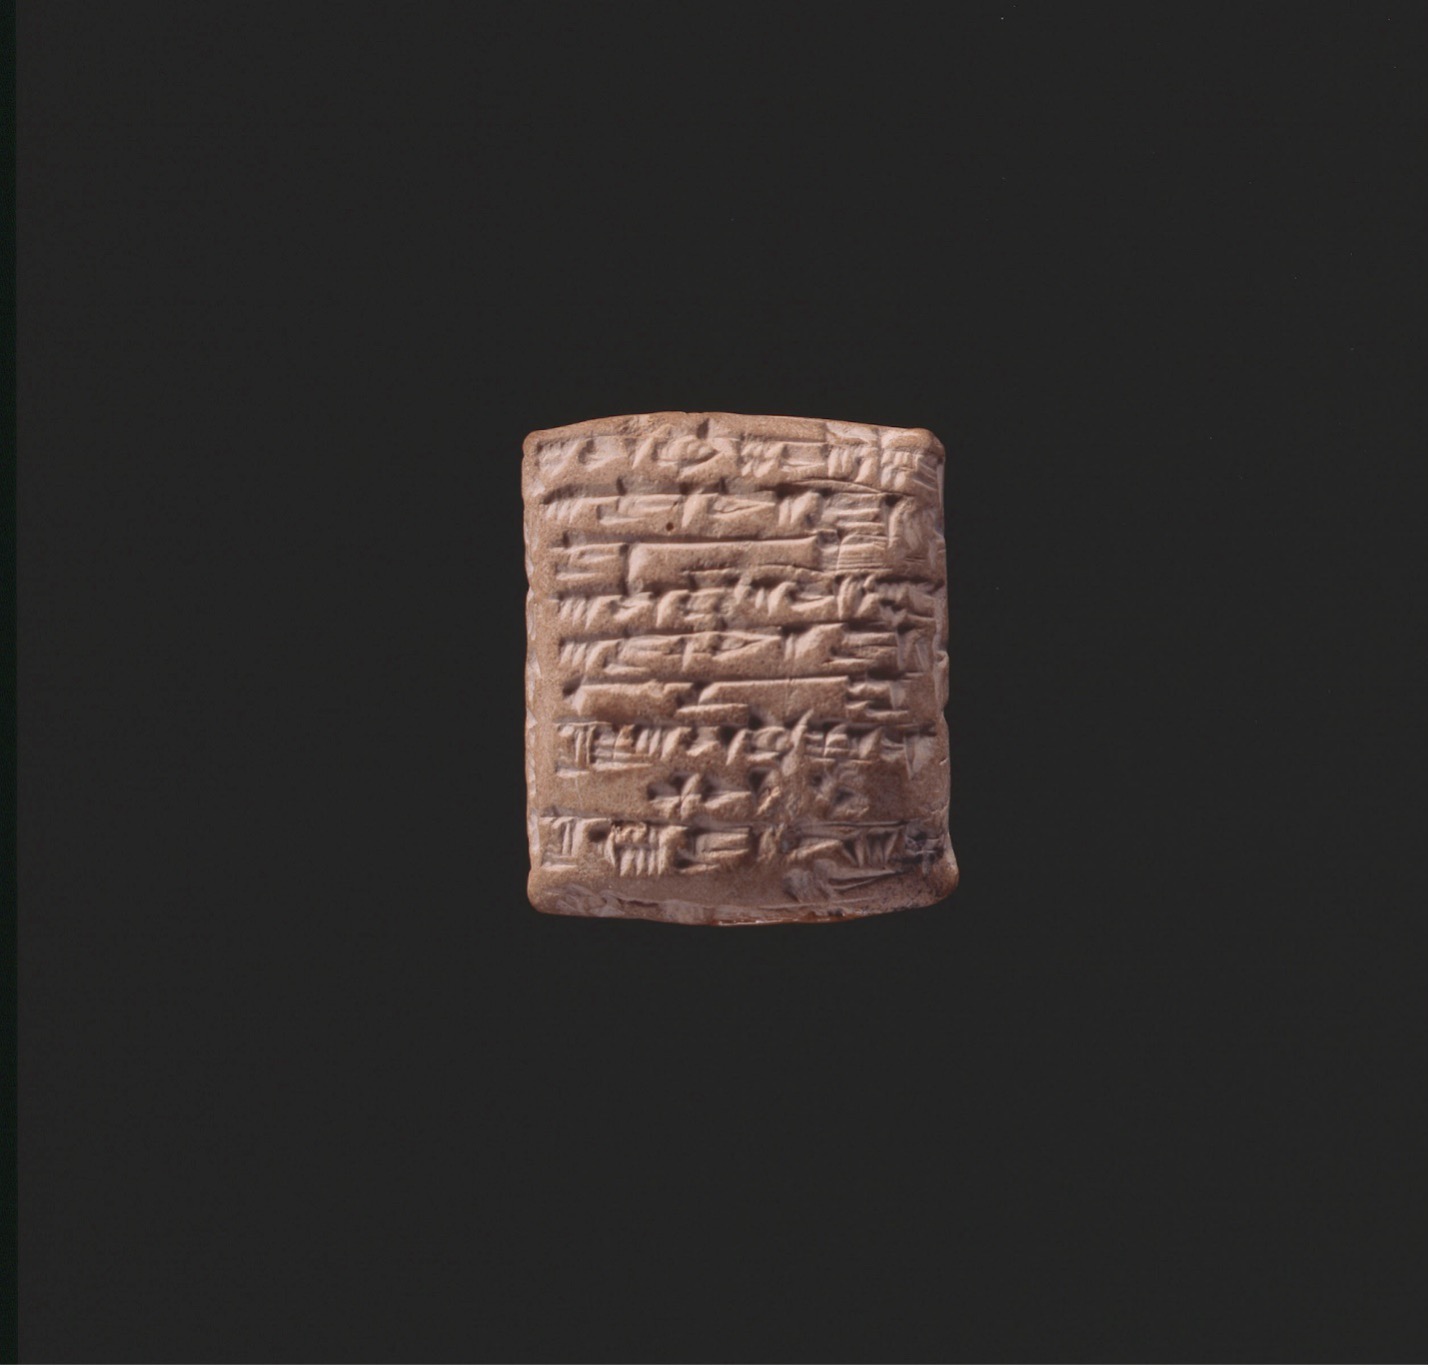 Cuneiform Tablet with Receipt of Goods to Individuals shown on a dark background